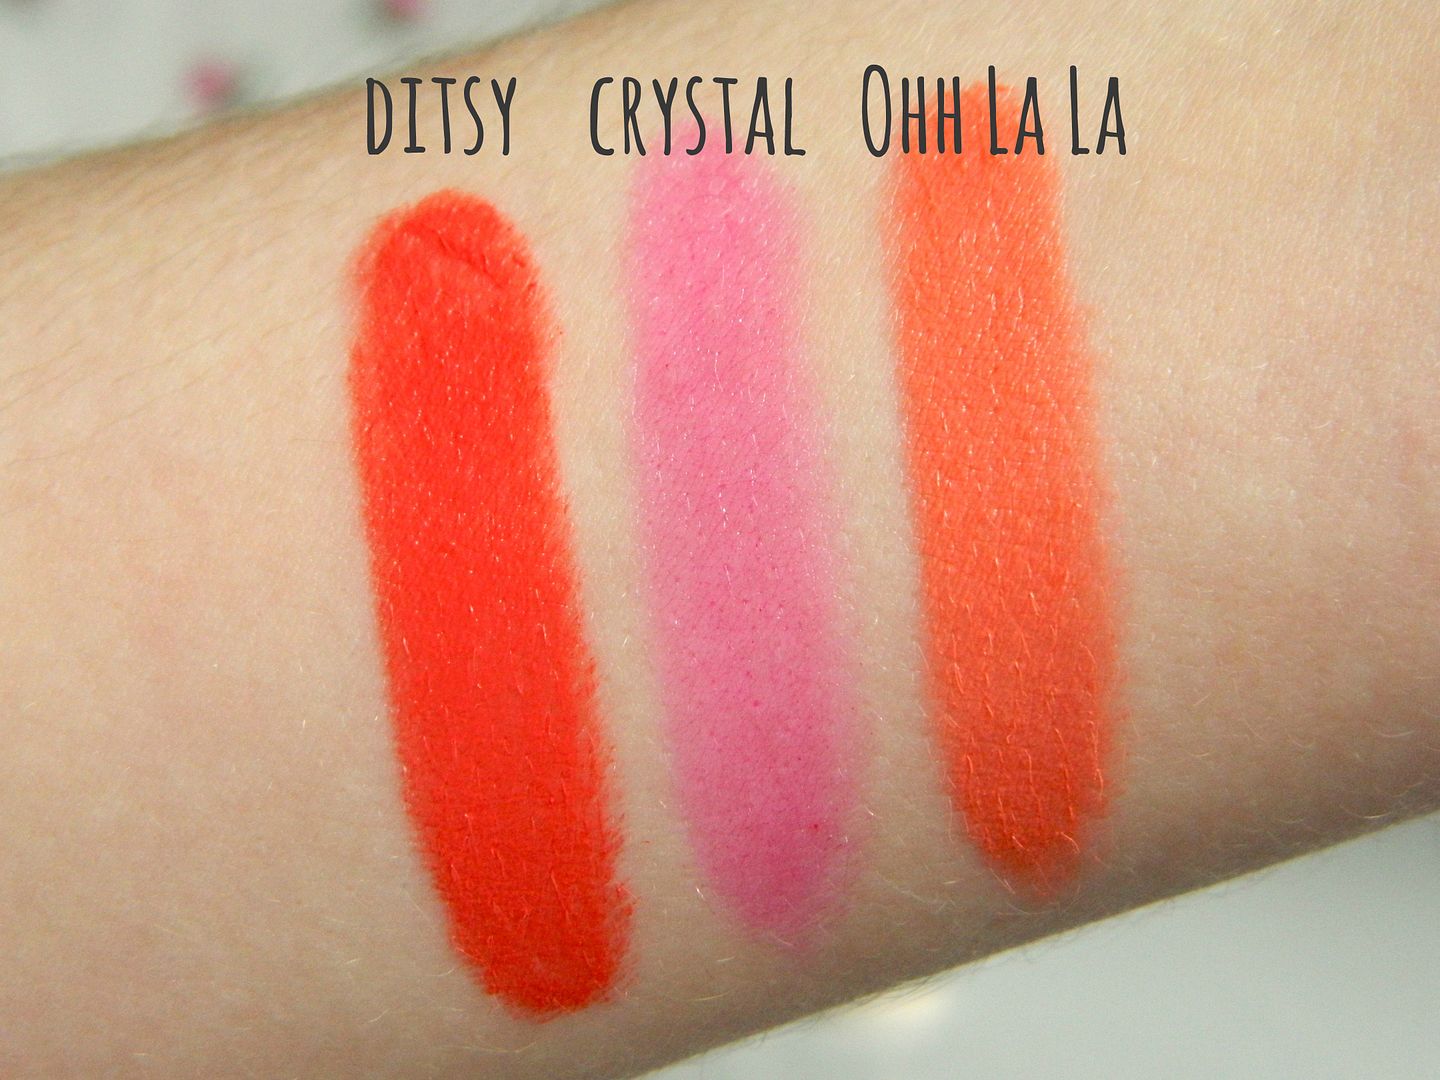 Topshop Lips Lipsticks Review Ditsy Crystal Ohh La La Swatch Review Belle-amie